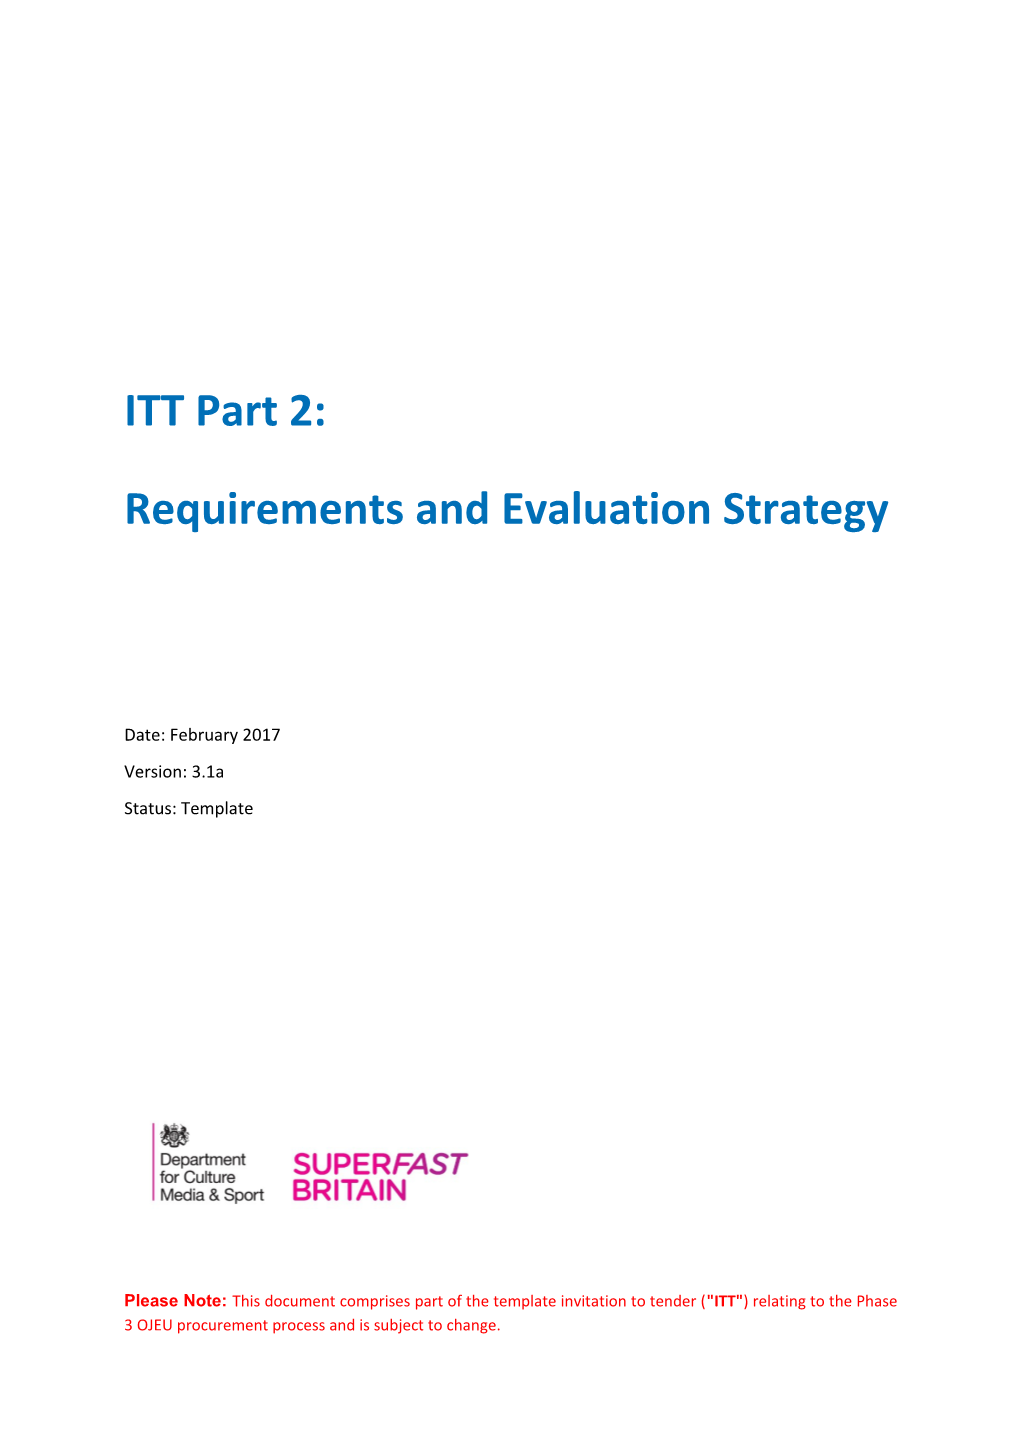 Requirements and Evaluation Strategy